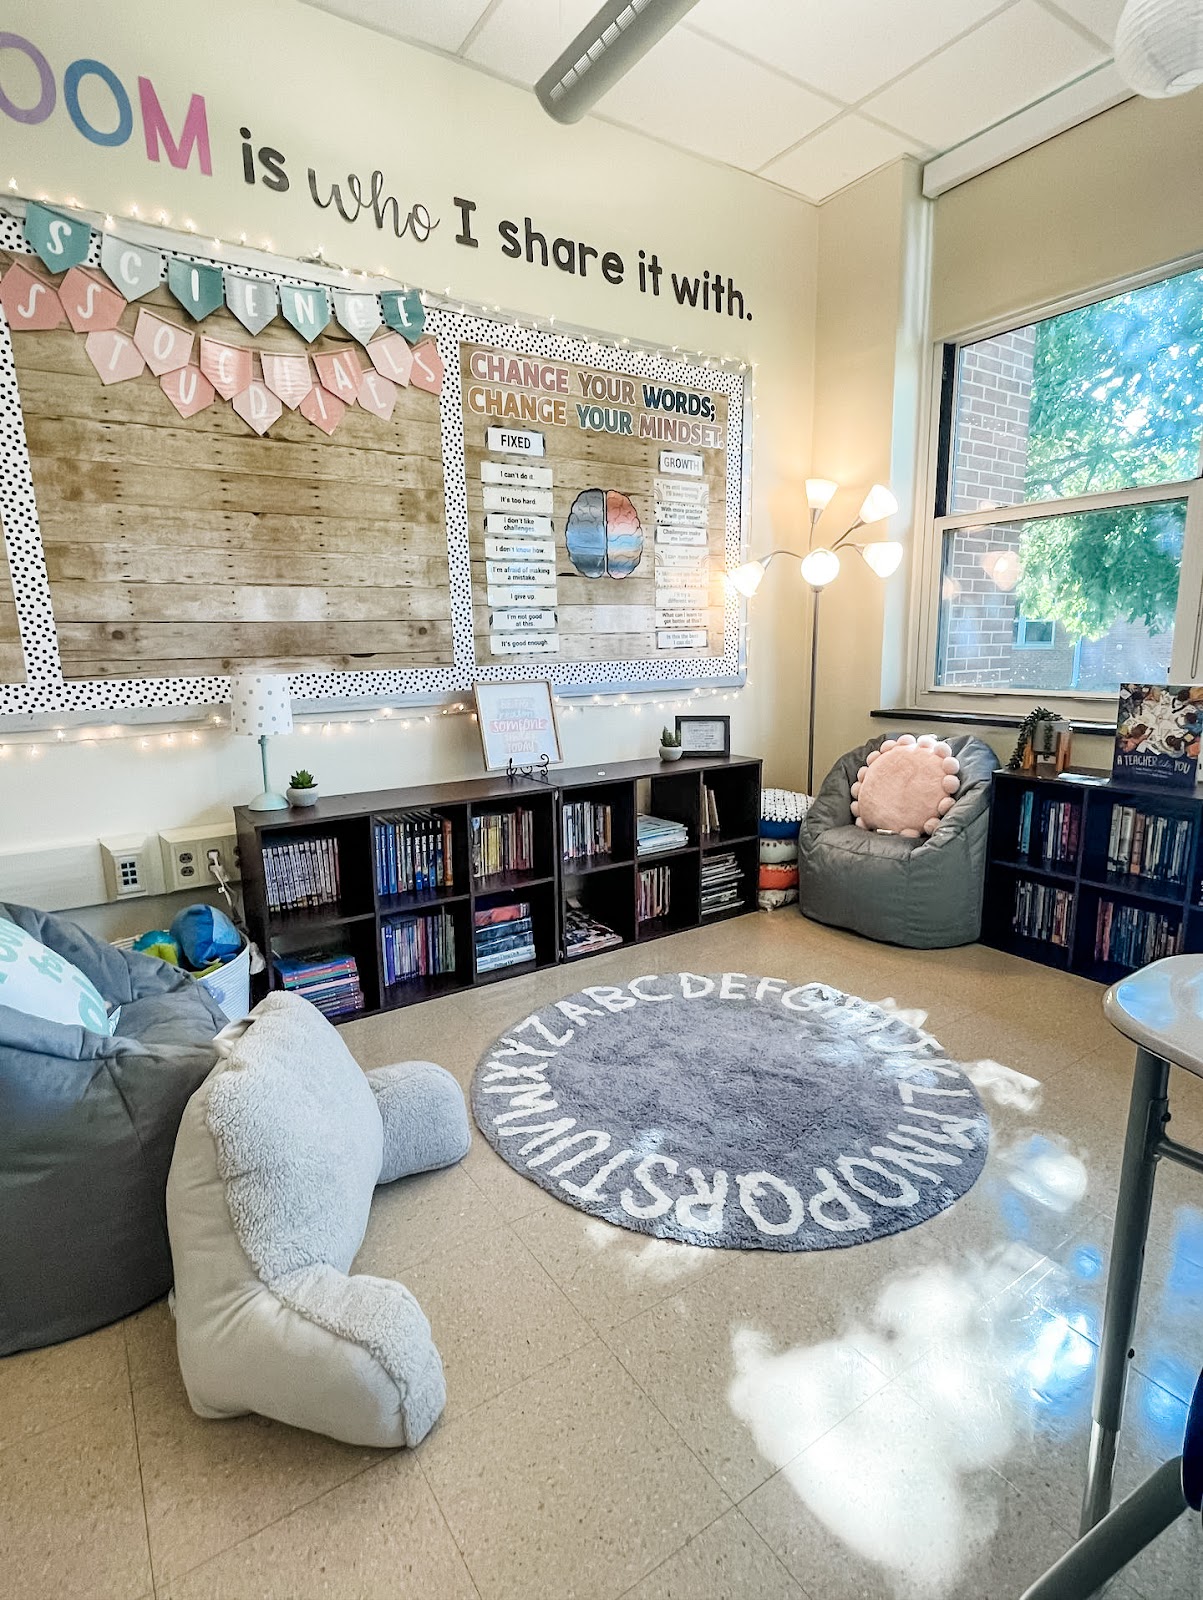 This image shows a cozy reading corner with bean bag chairs, a rug, and a floor lamp. 